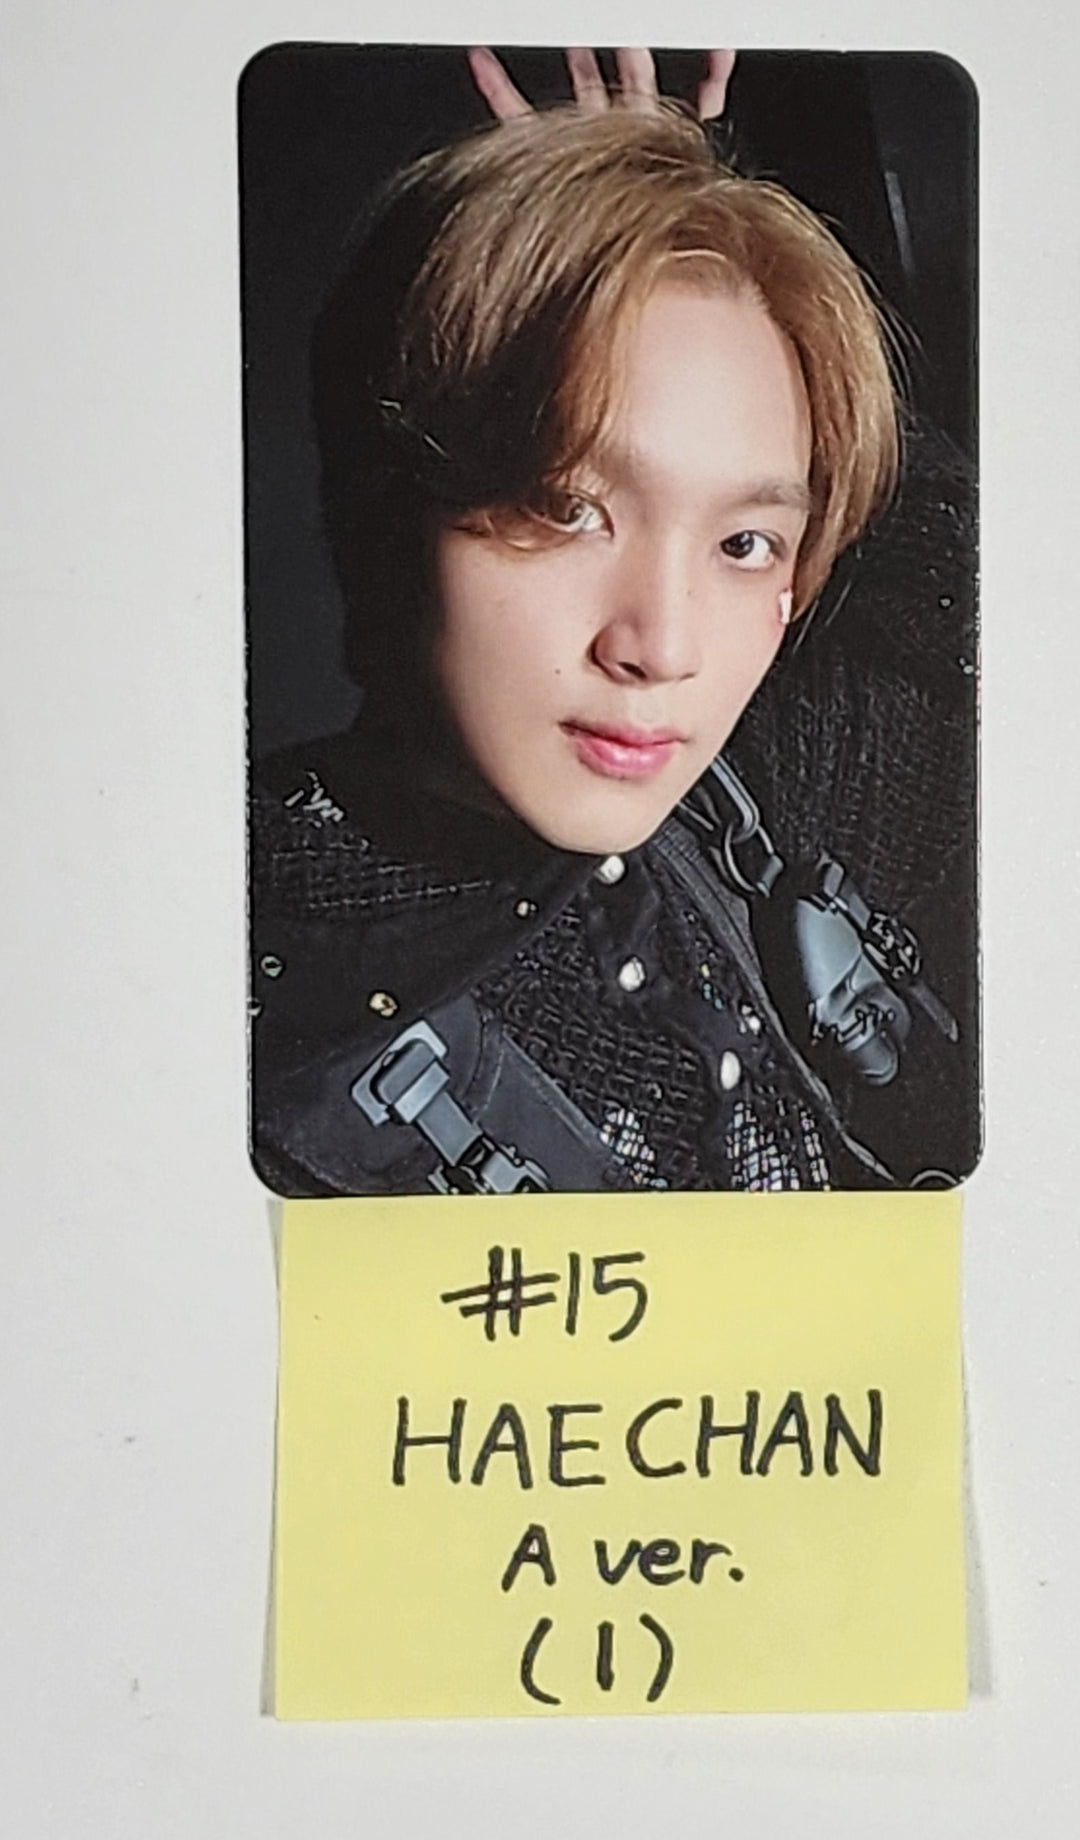 NCT 127 "Fact Check" 不可思議 展 : NCT 127 The 5th Album - SM Town Pop-Up Trading Photocard [A Ver] [23.12.13]